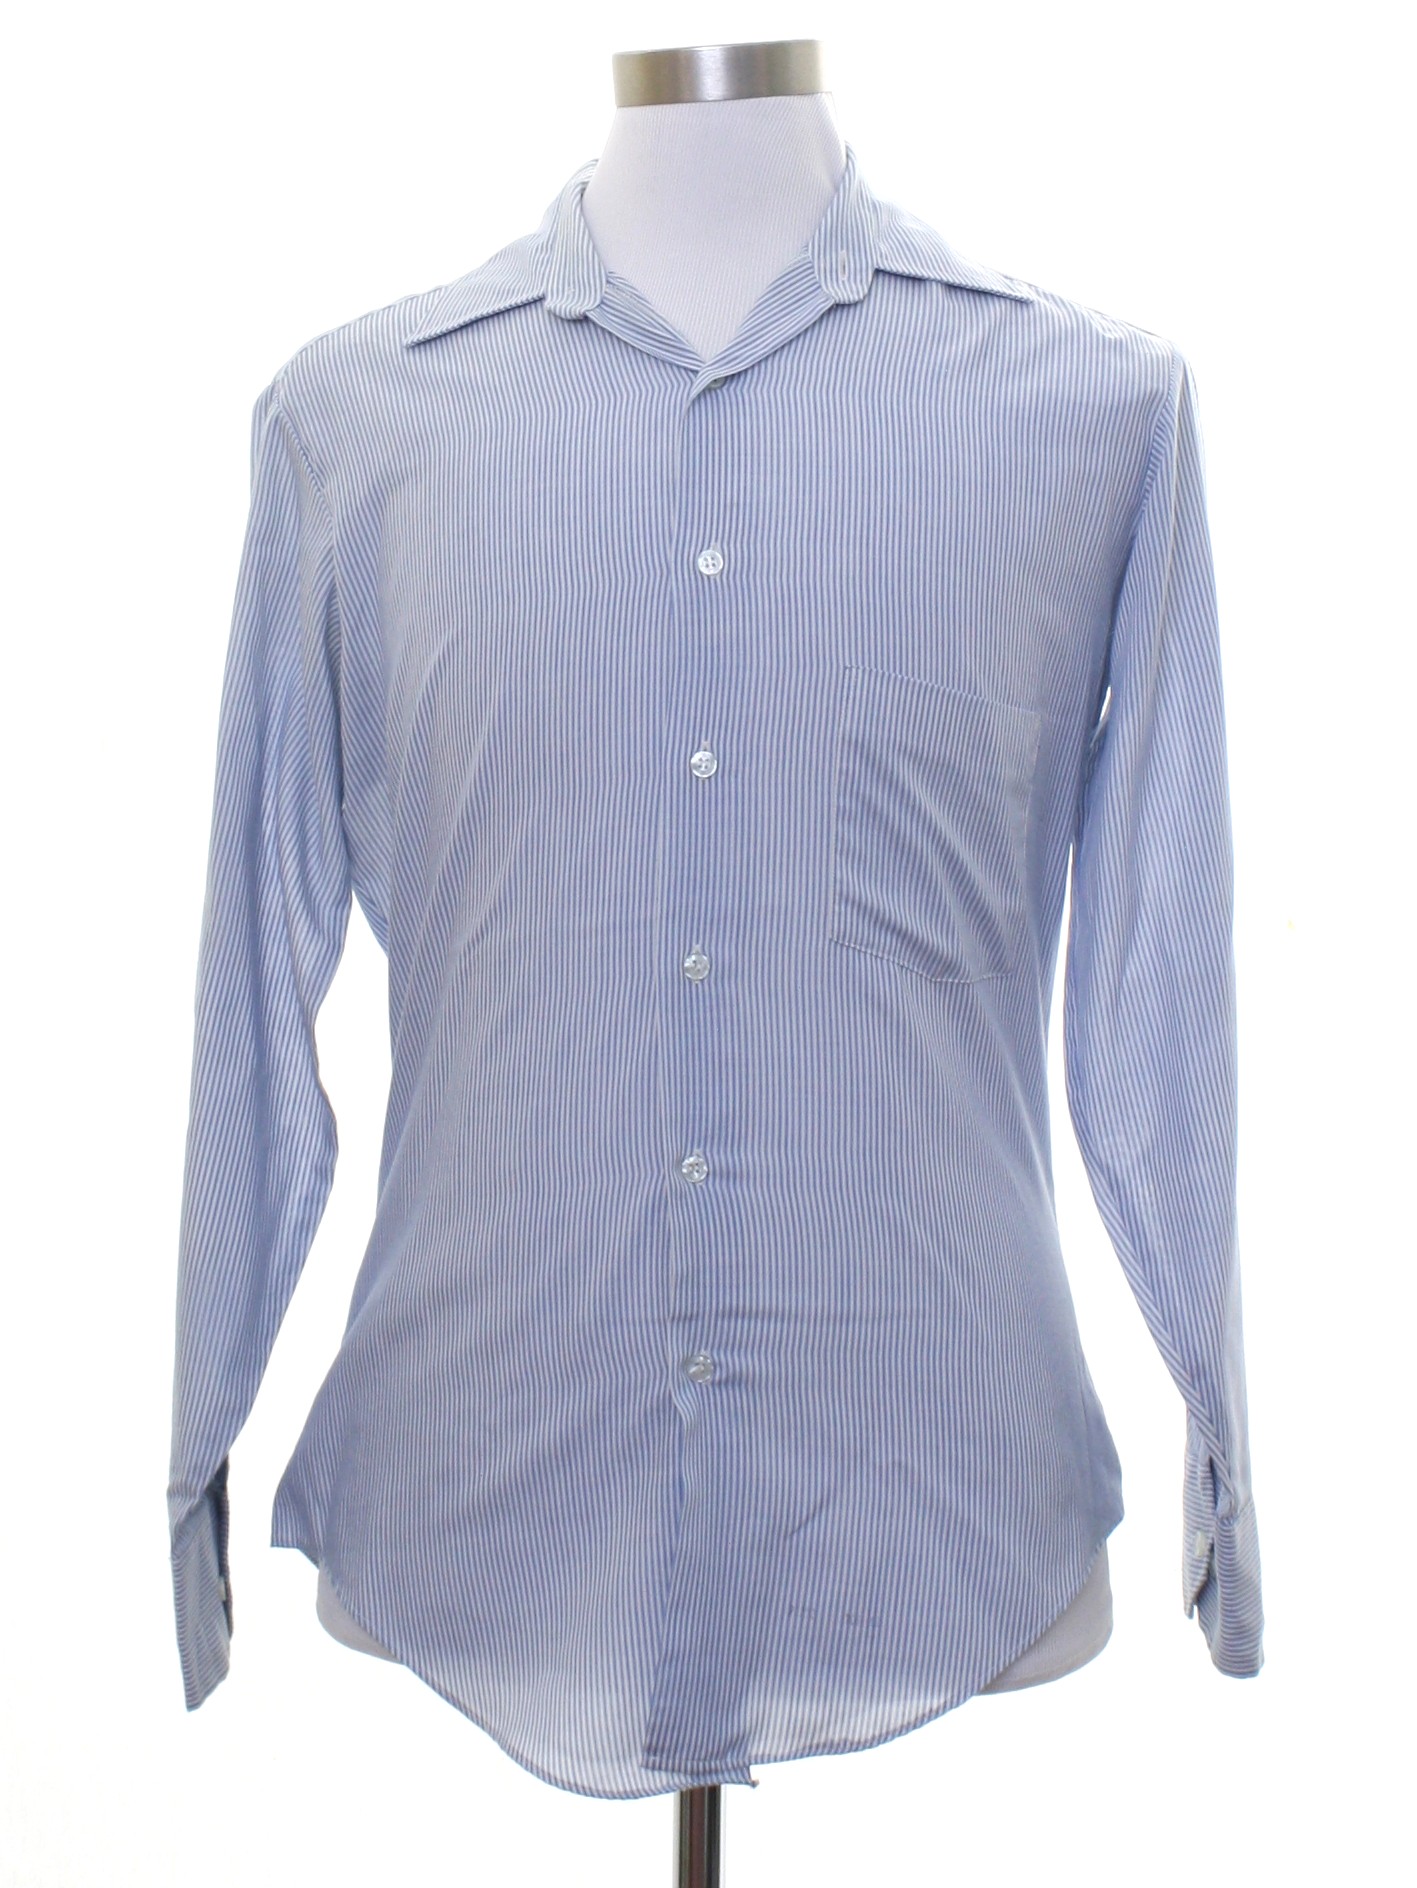 1980s Sears Shirt: Early 80s -Sears- Mens white and dusty blue ...